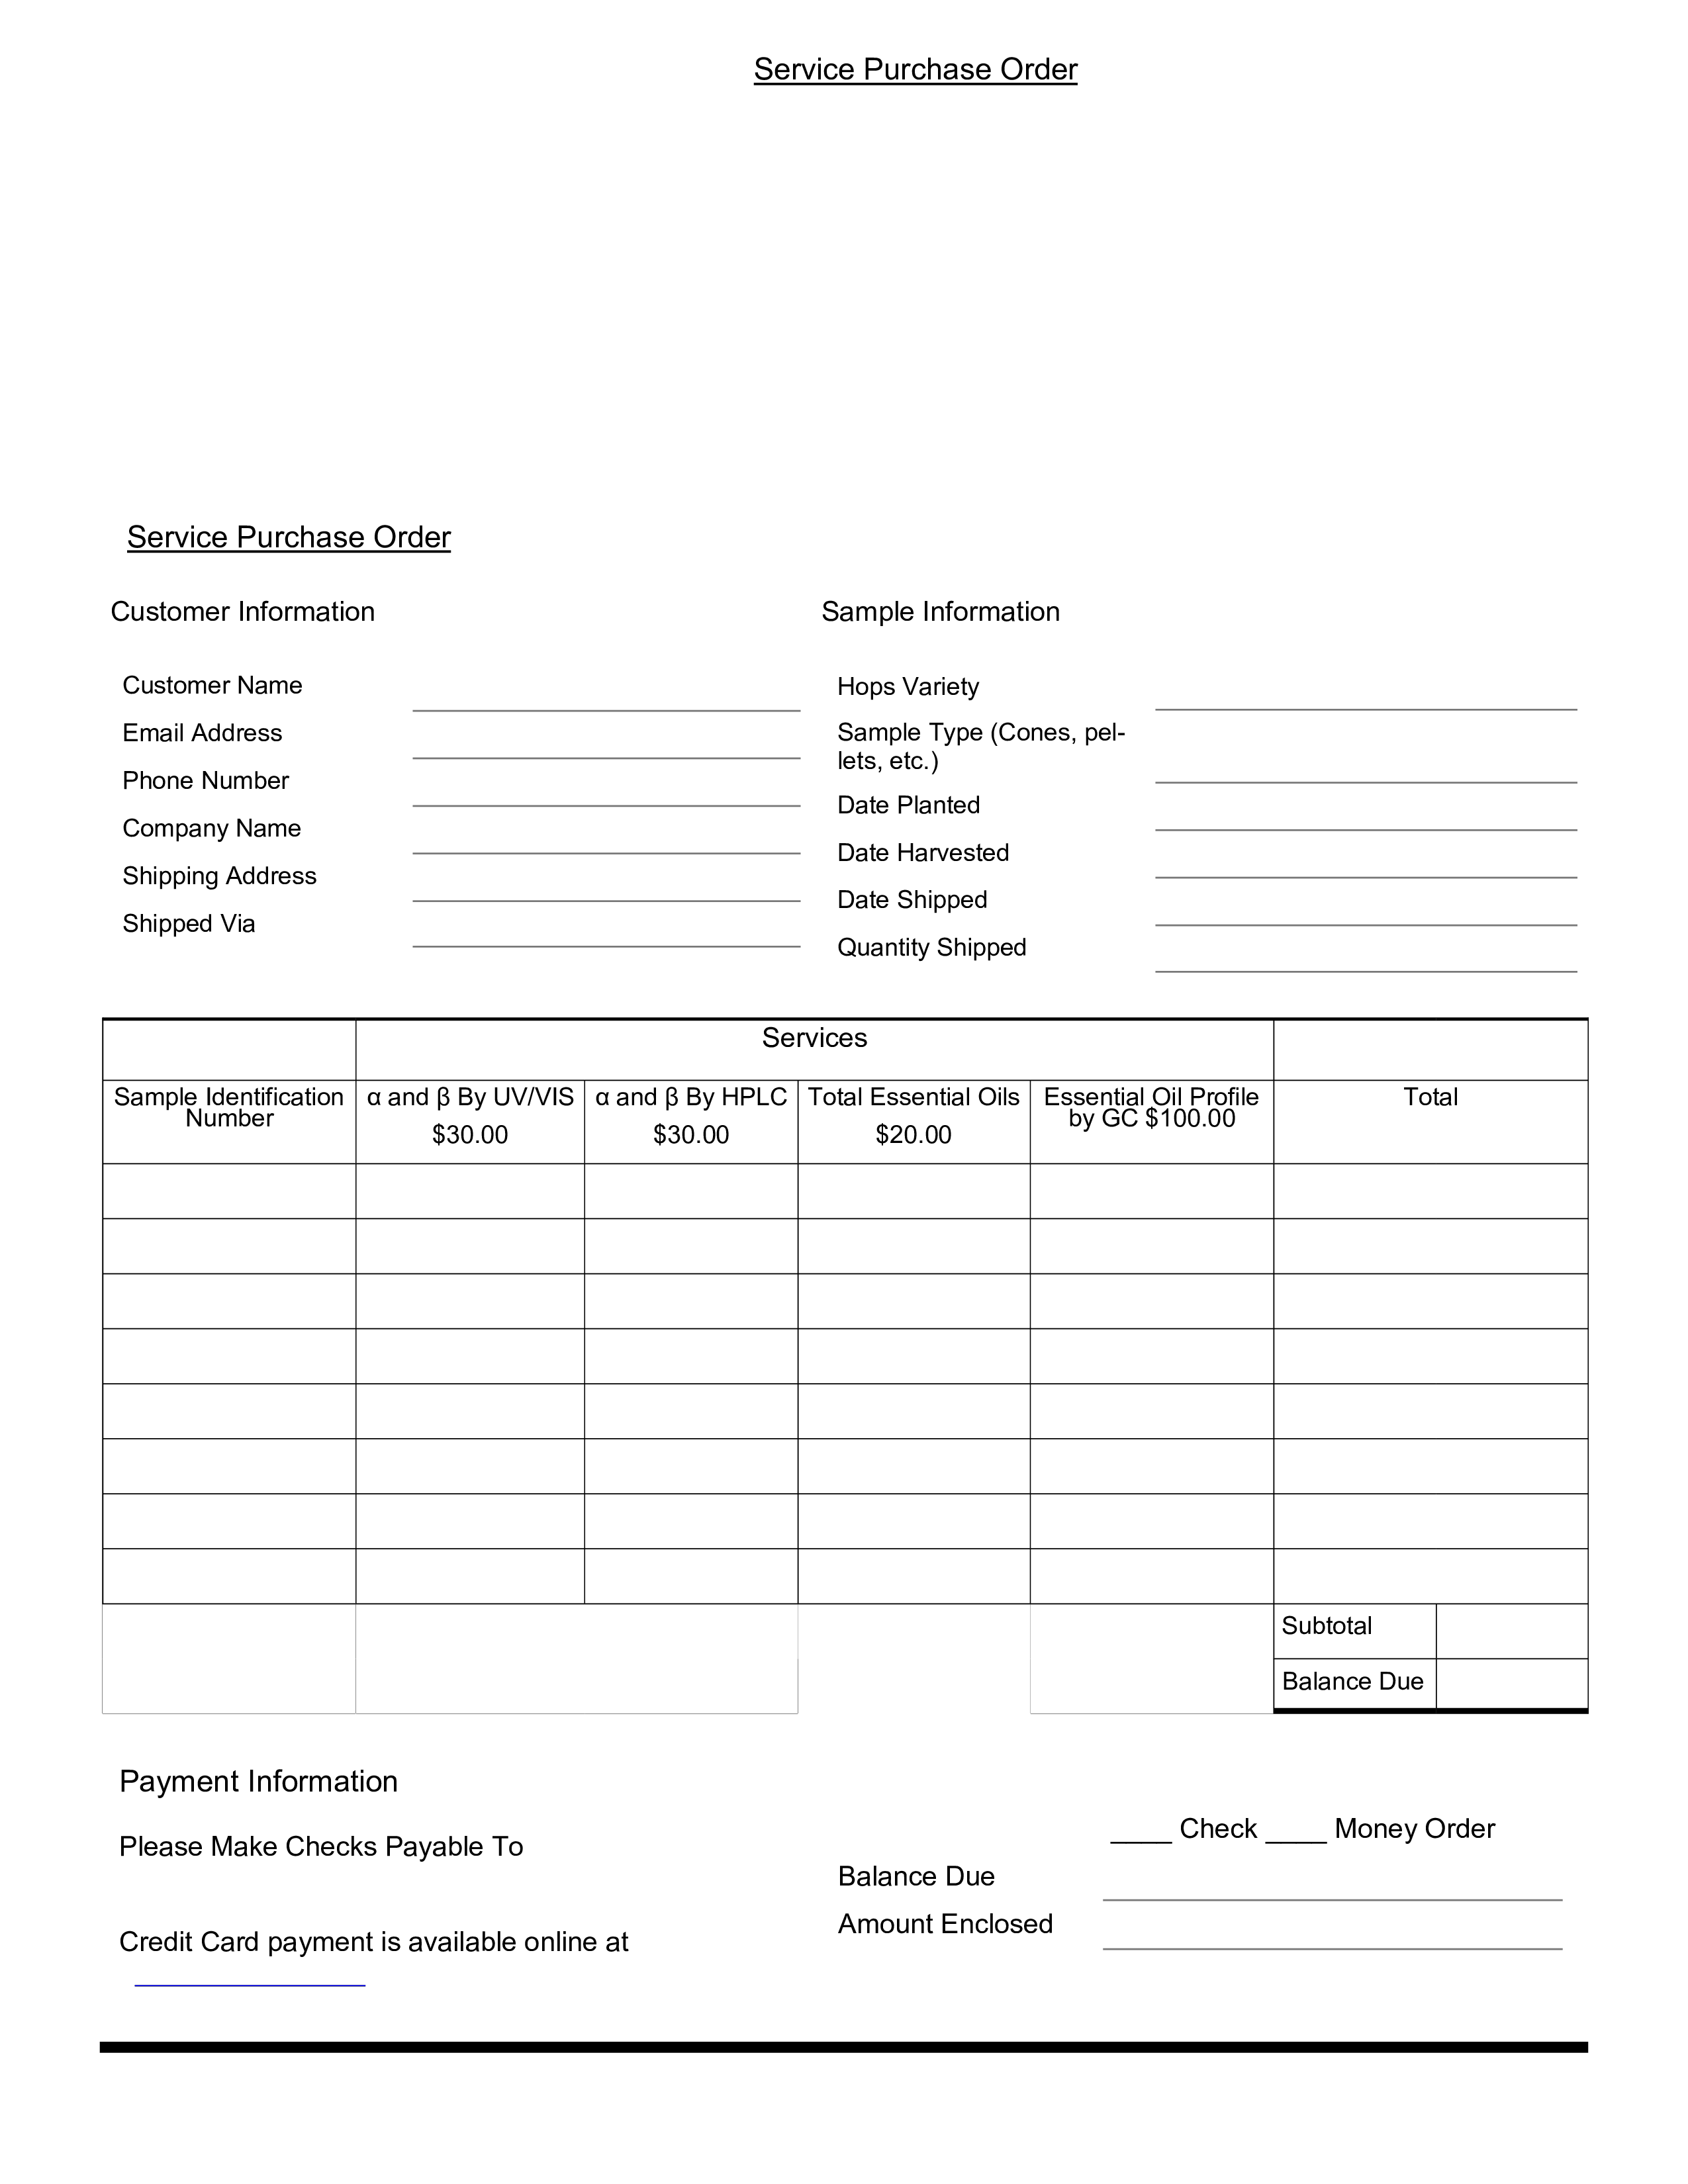 service purchase order template